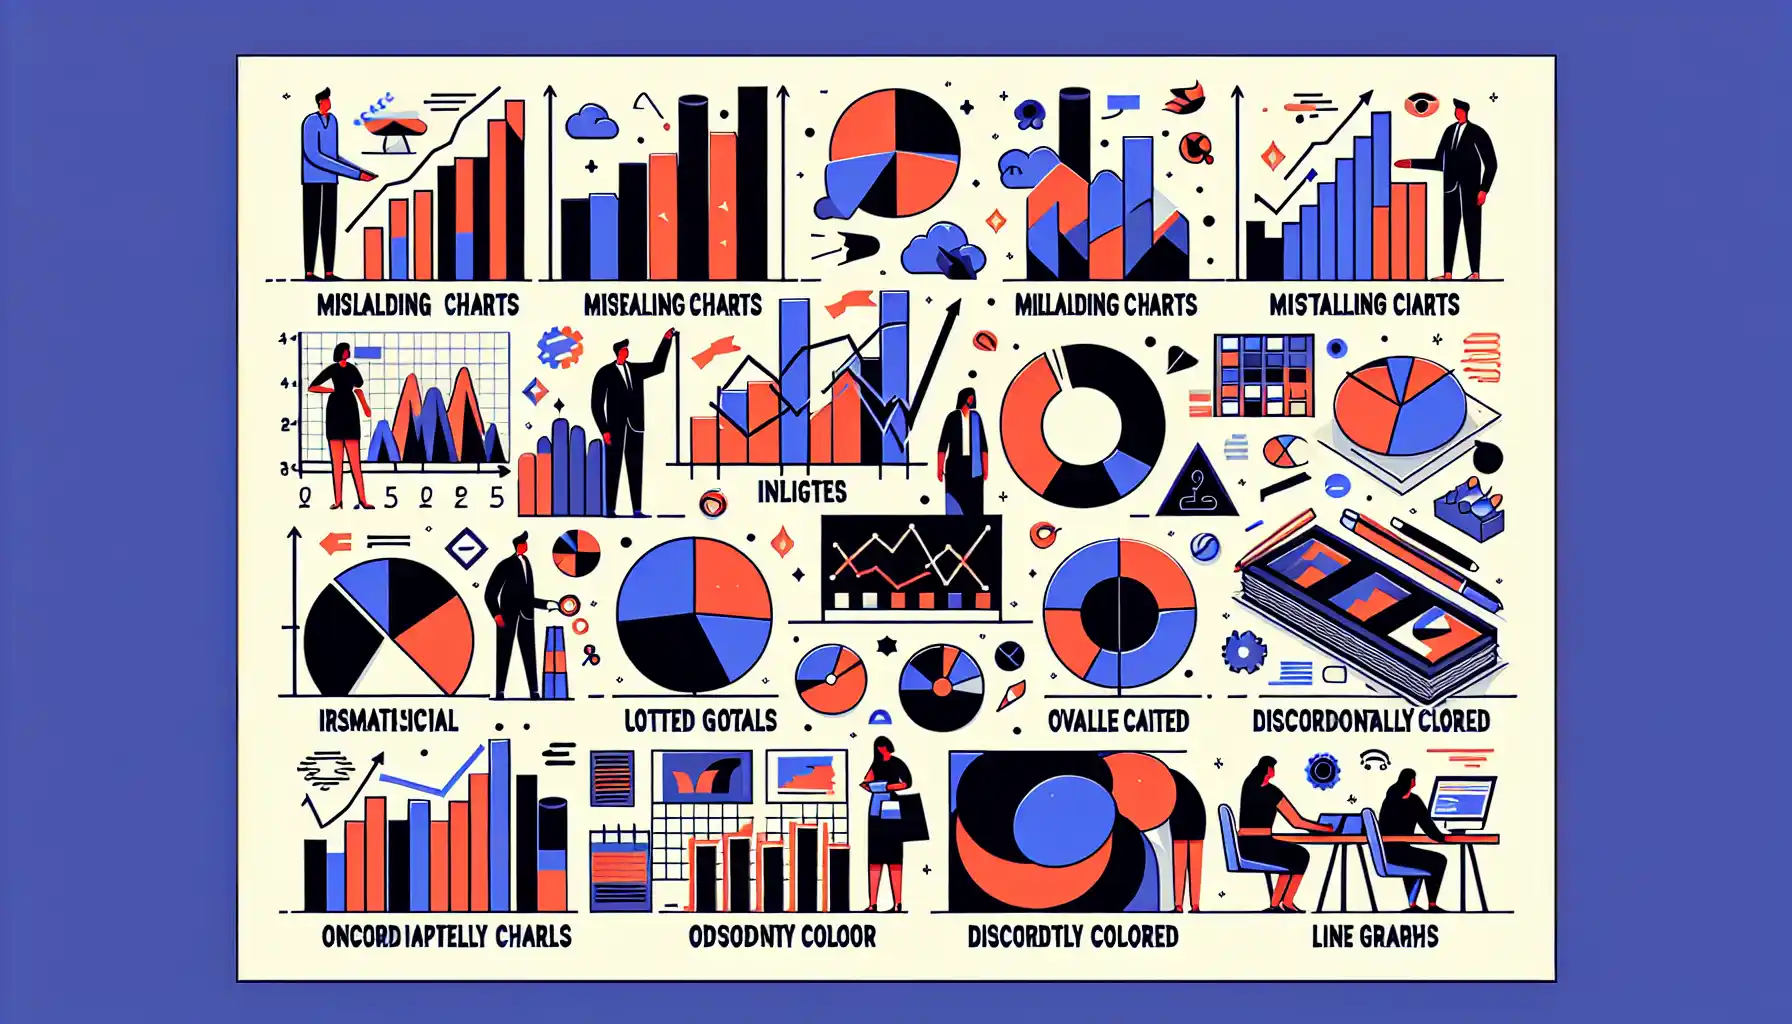 Common Mistakes in Data Visualization